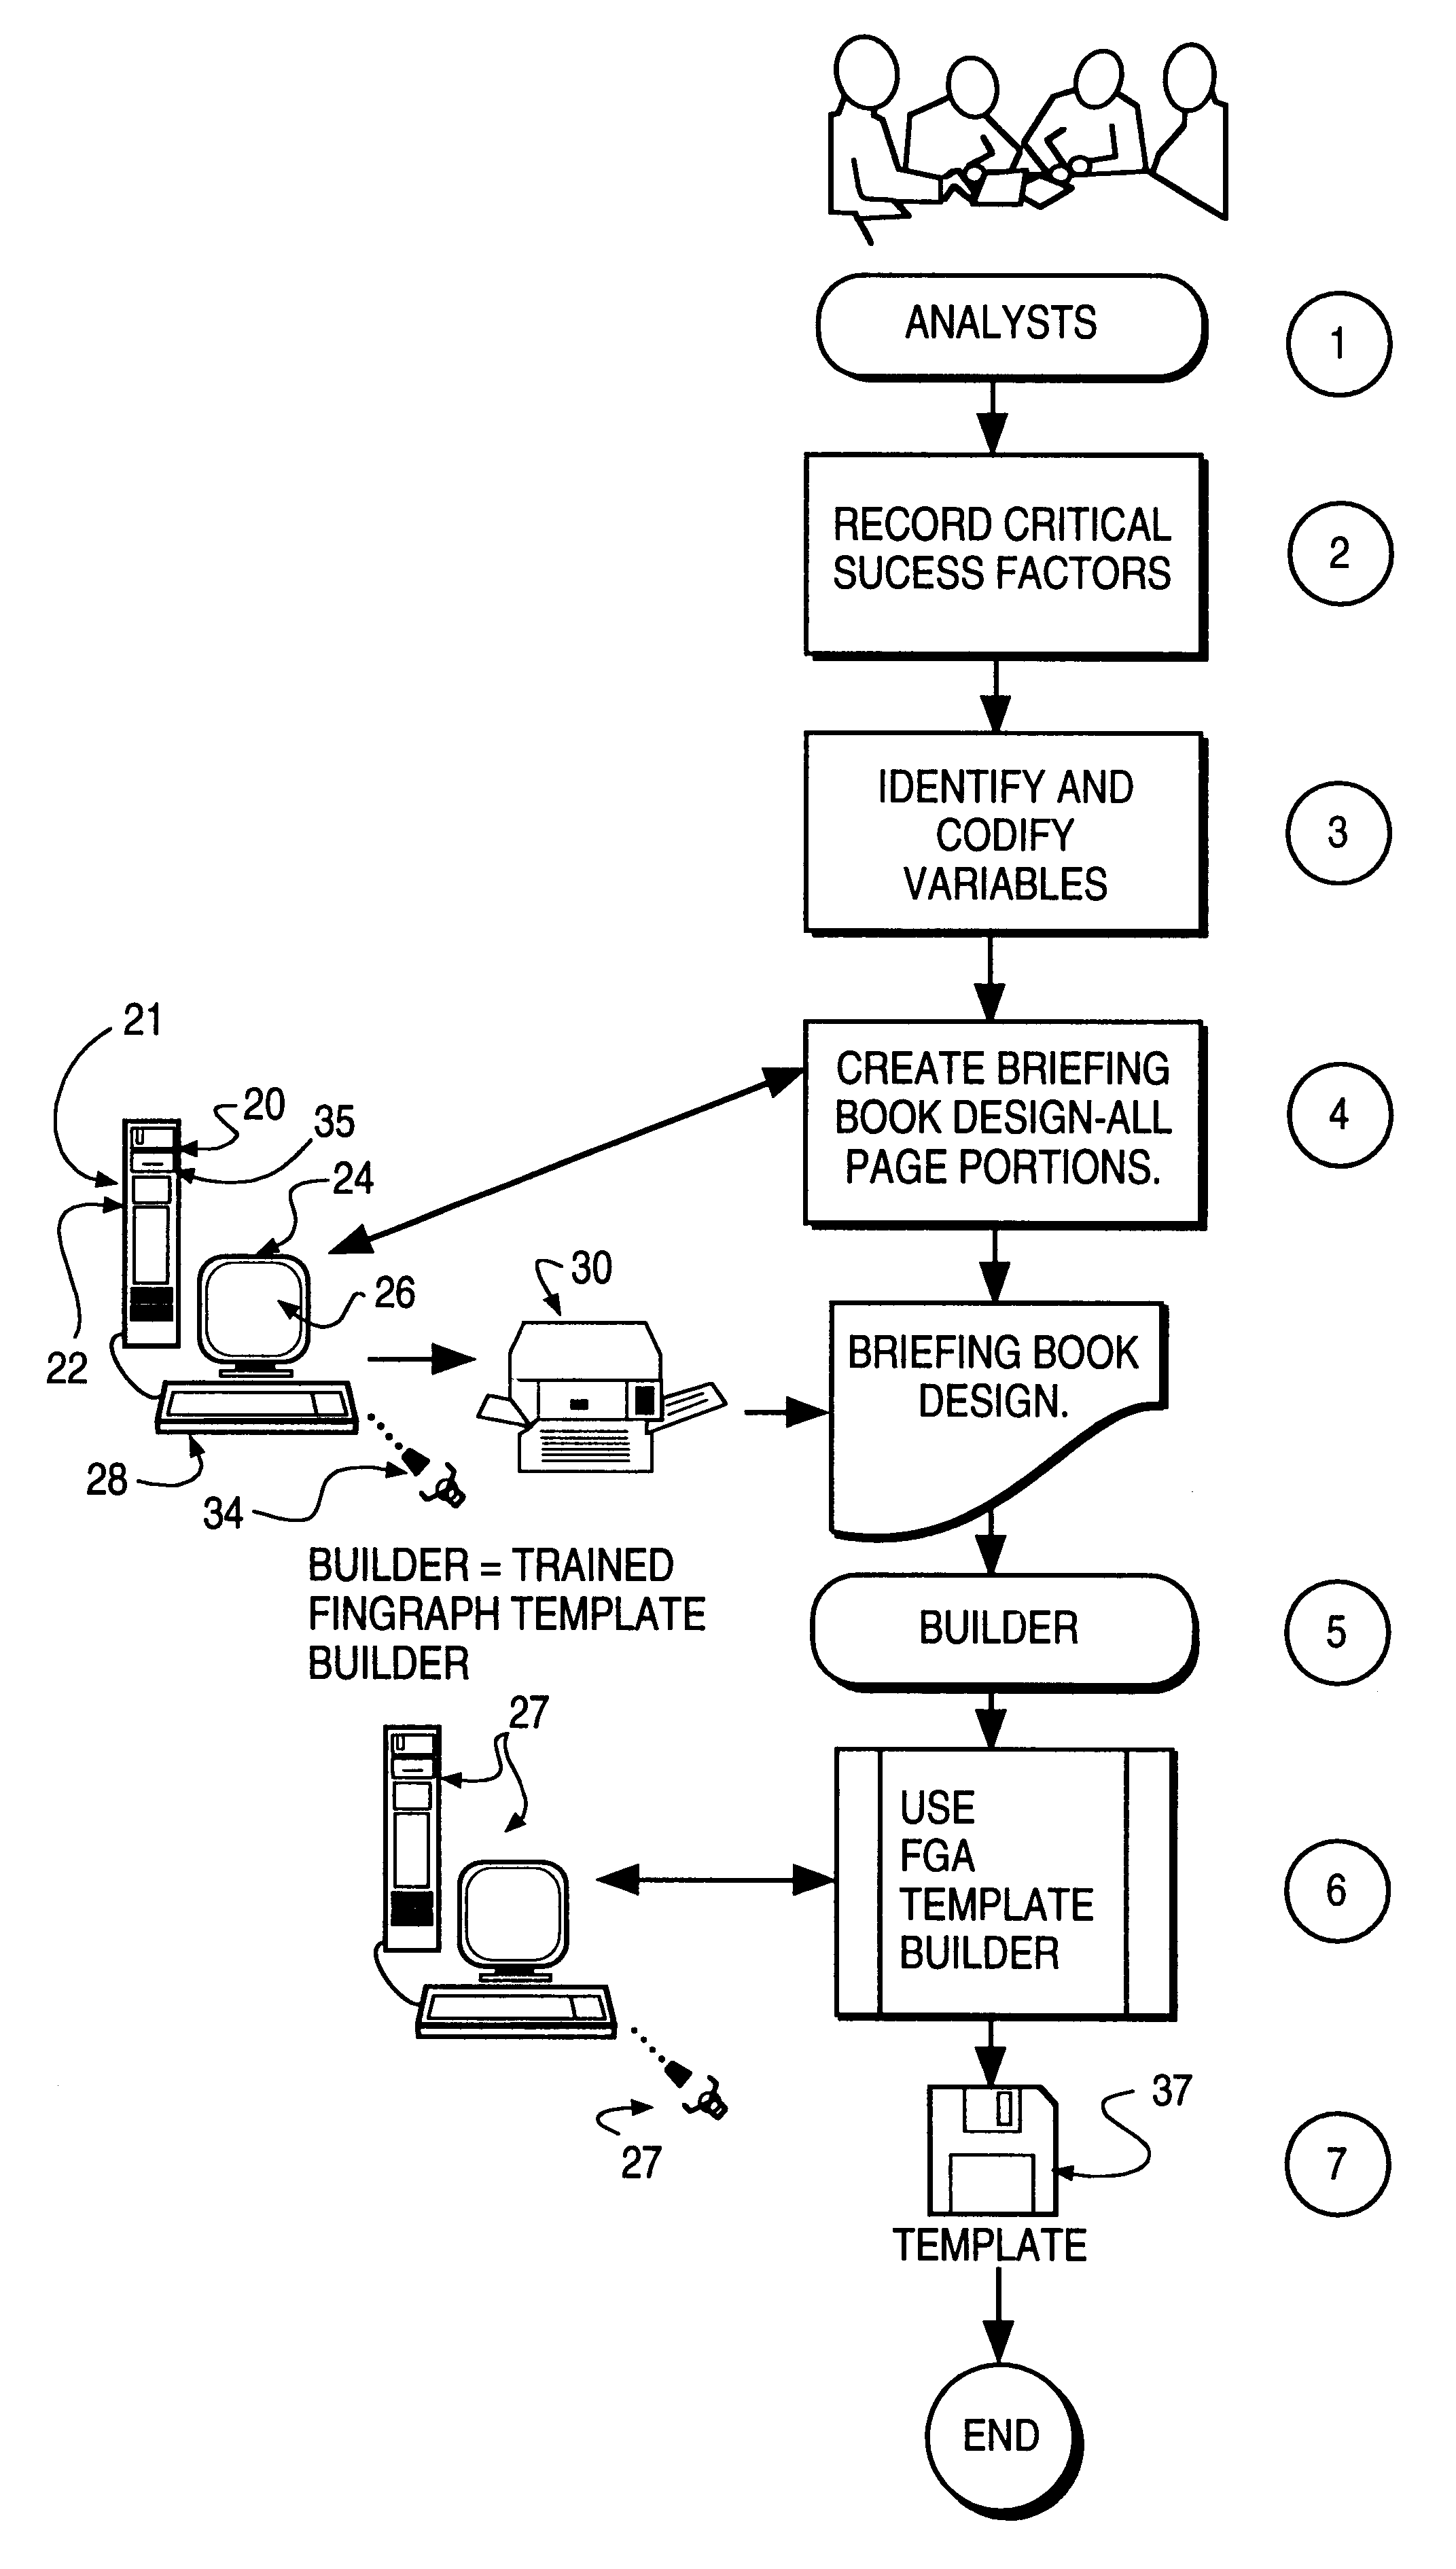 Digital electrical computer apparatus, and methods for making and using the same, for template building, loading, and viewing